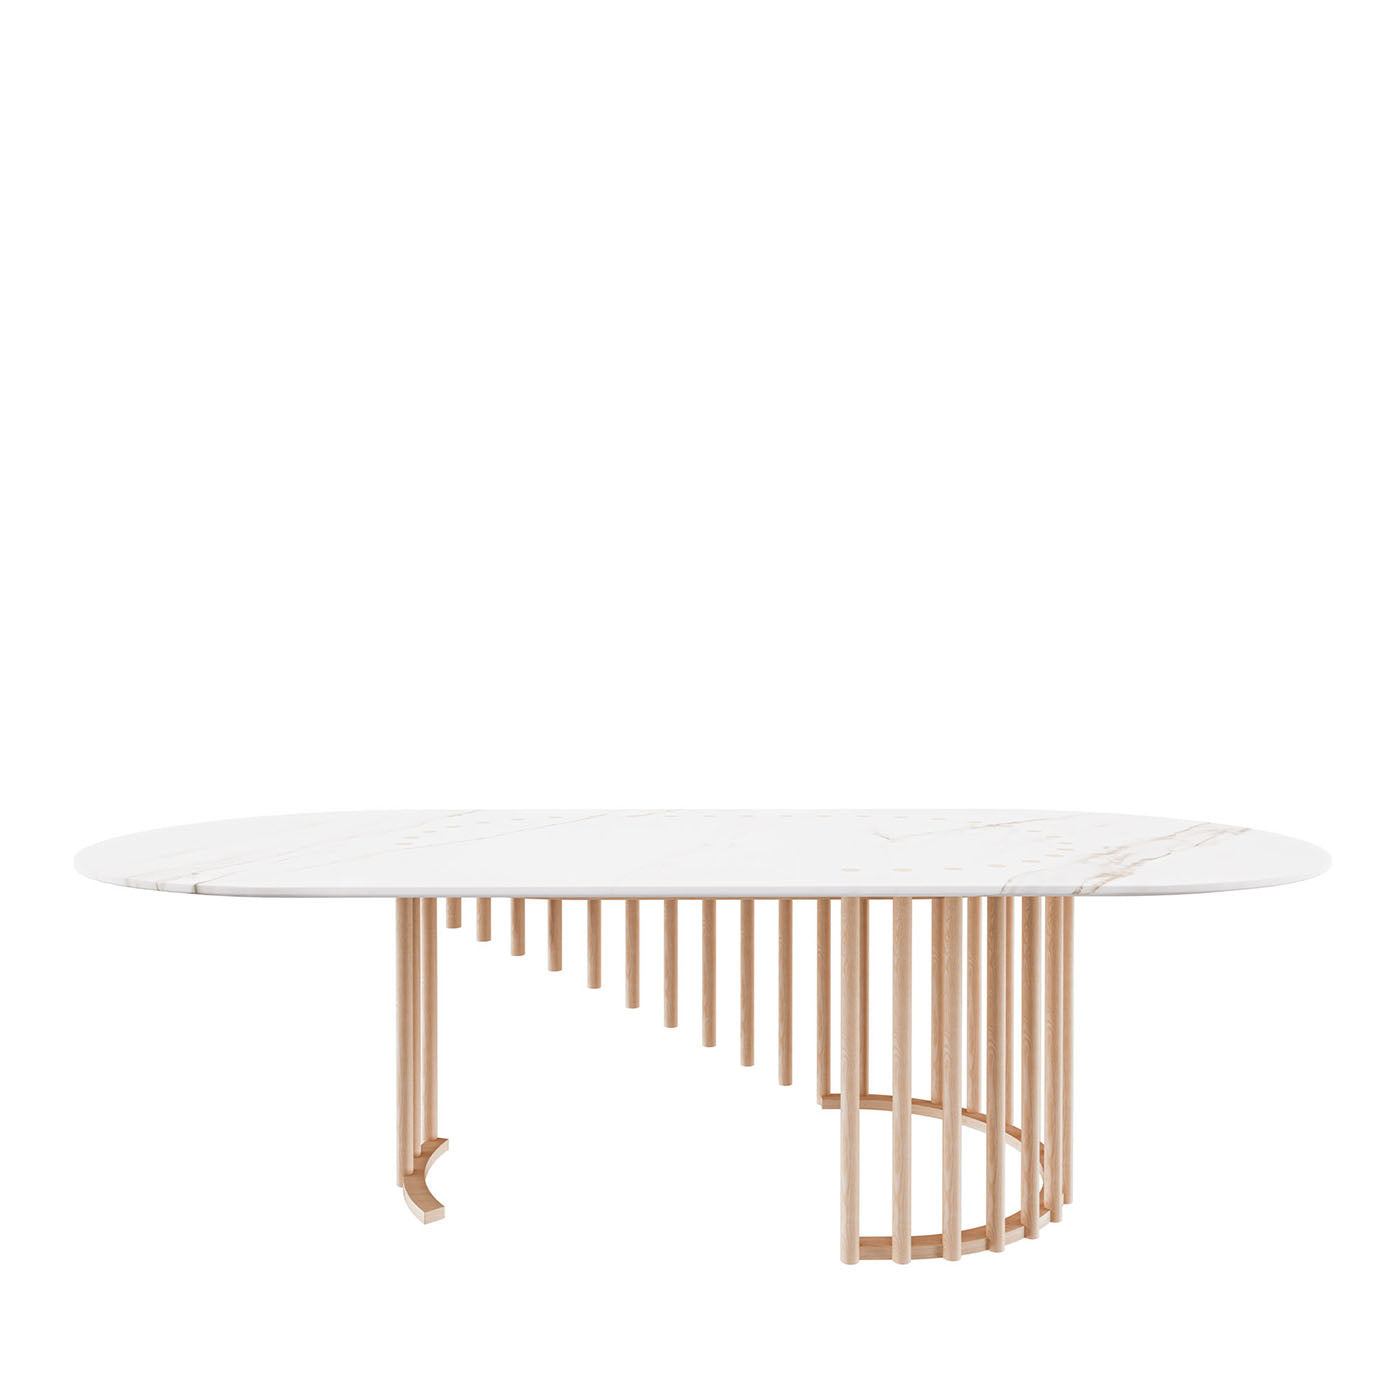 Giunchi Cocktail Table by Hebanon Studio - Main view